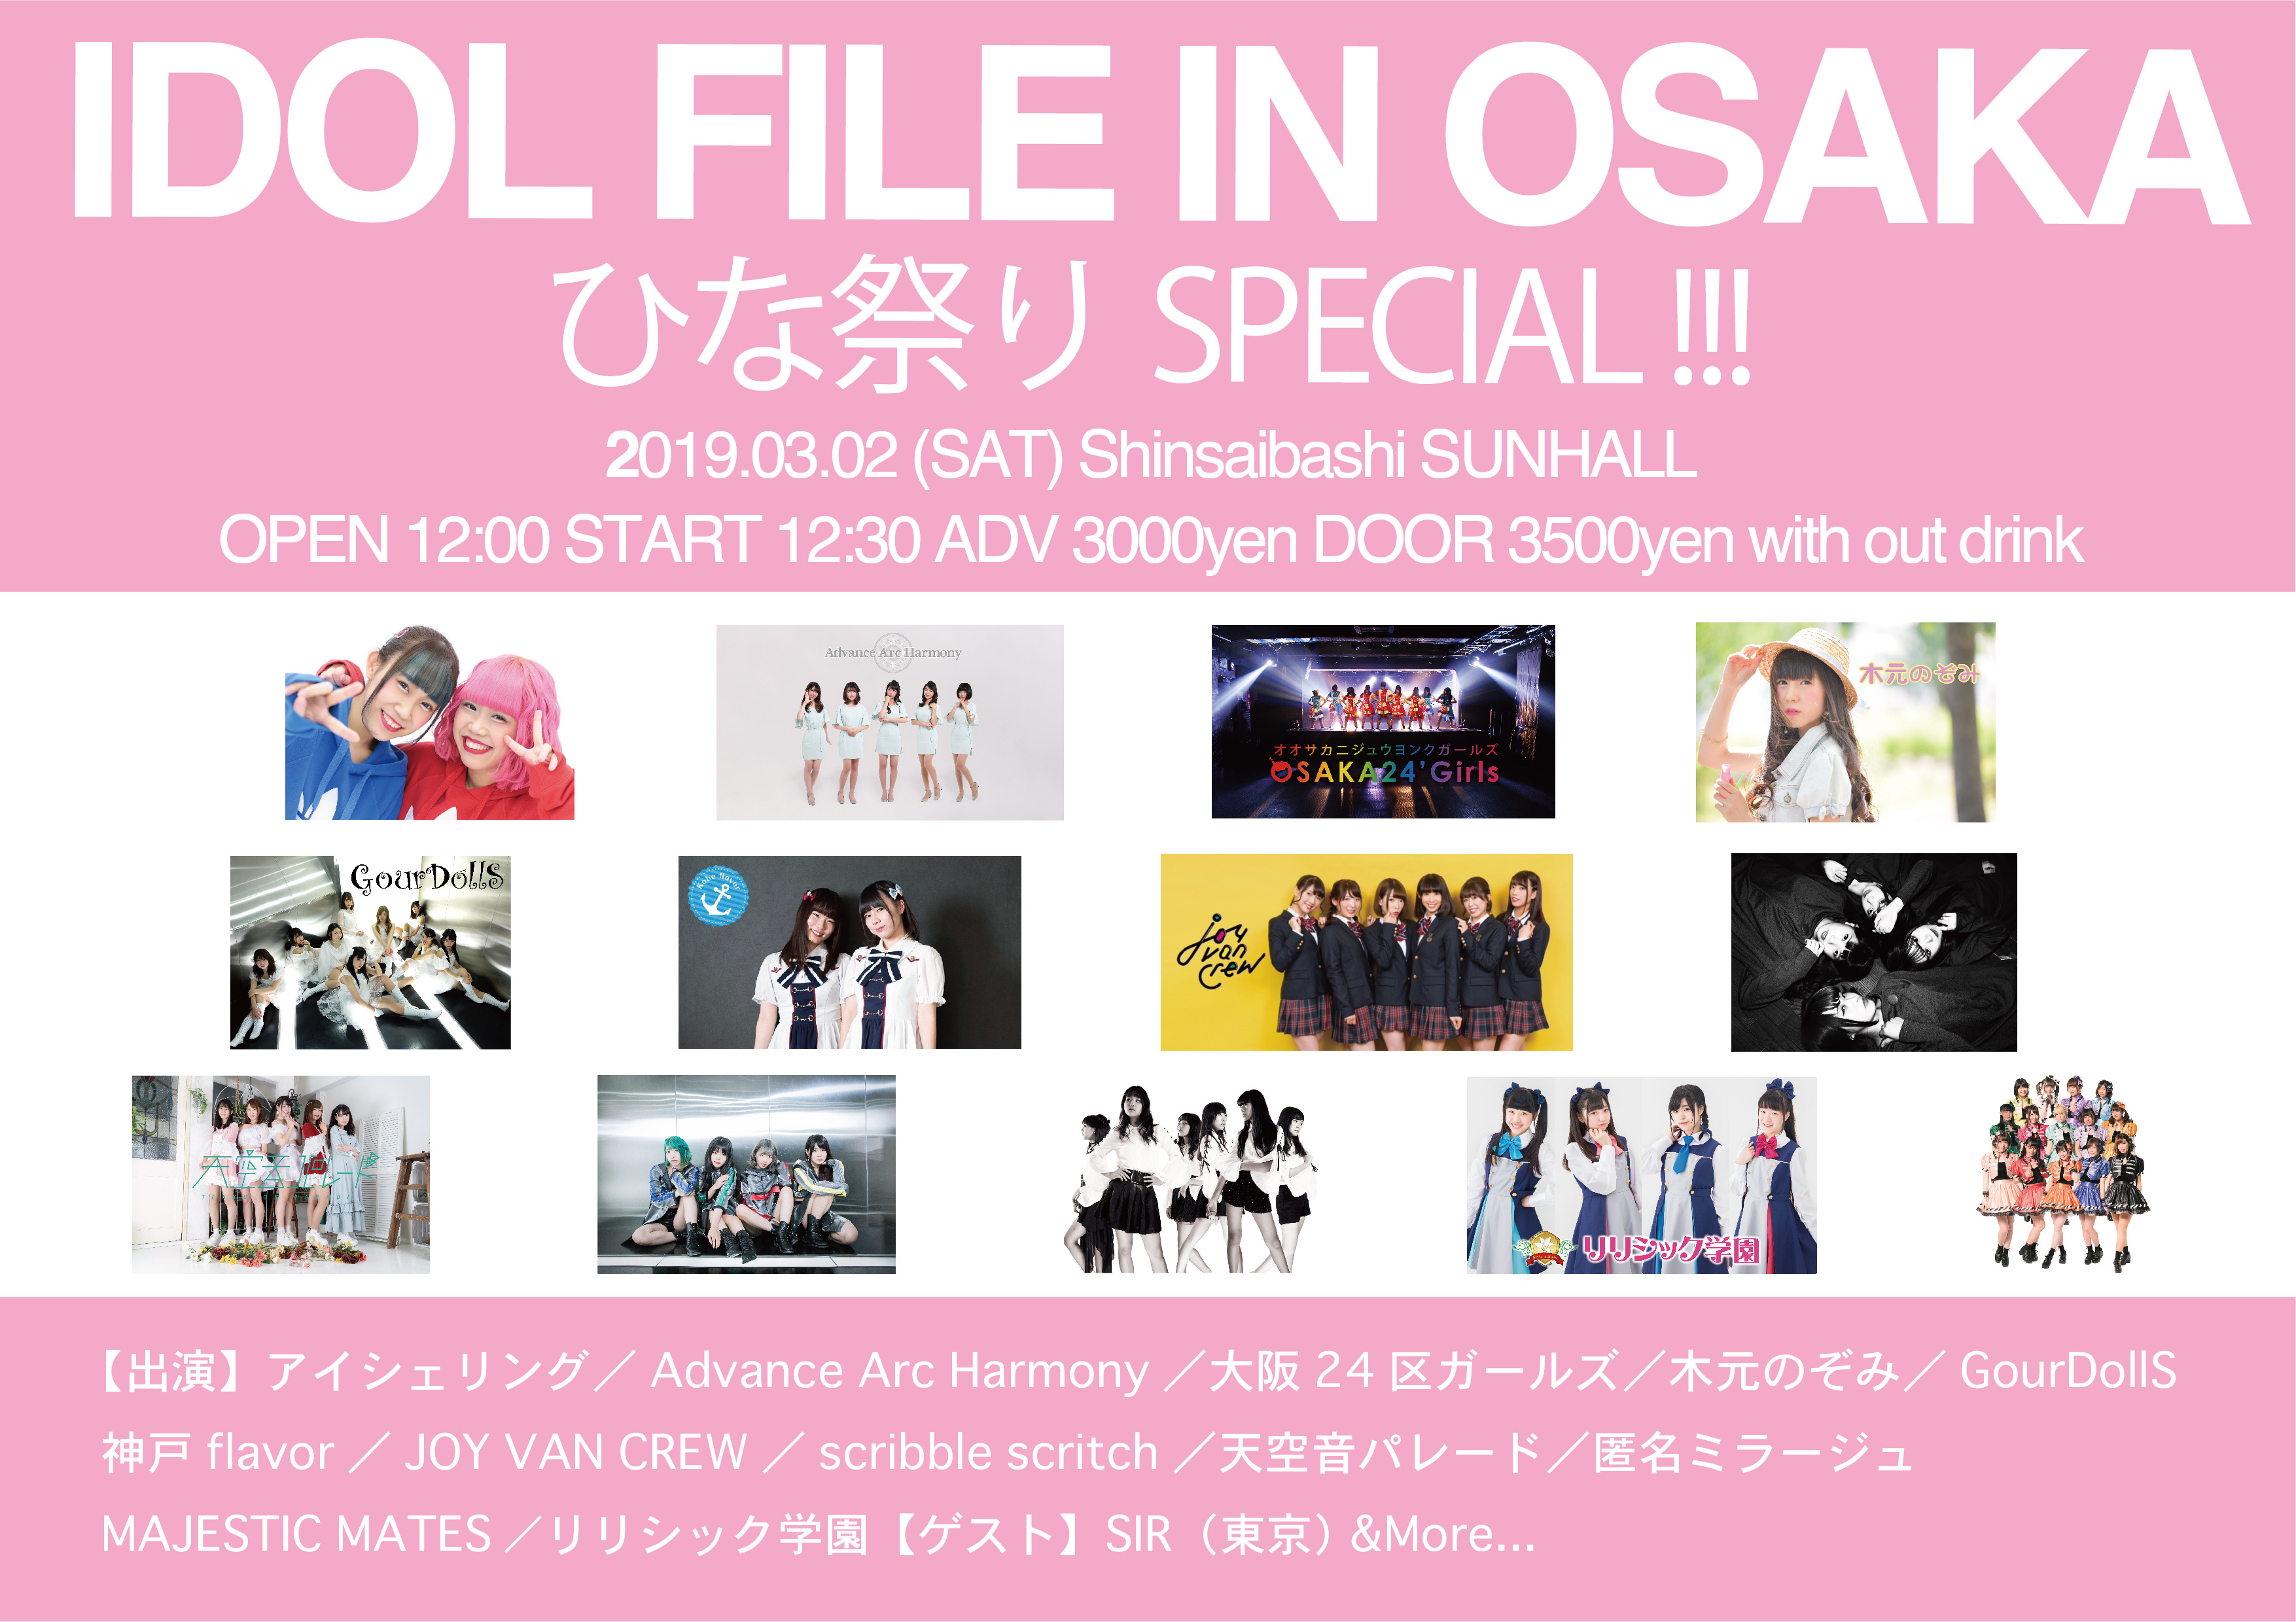 IDOL FILE IN OSAKA ひな祭りSPECIAL!!!